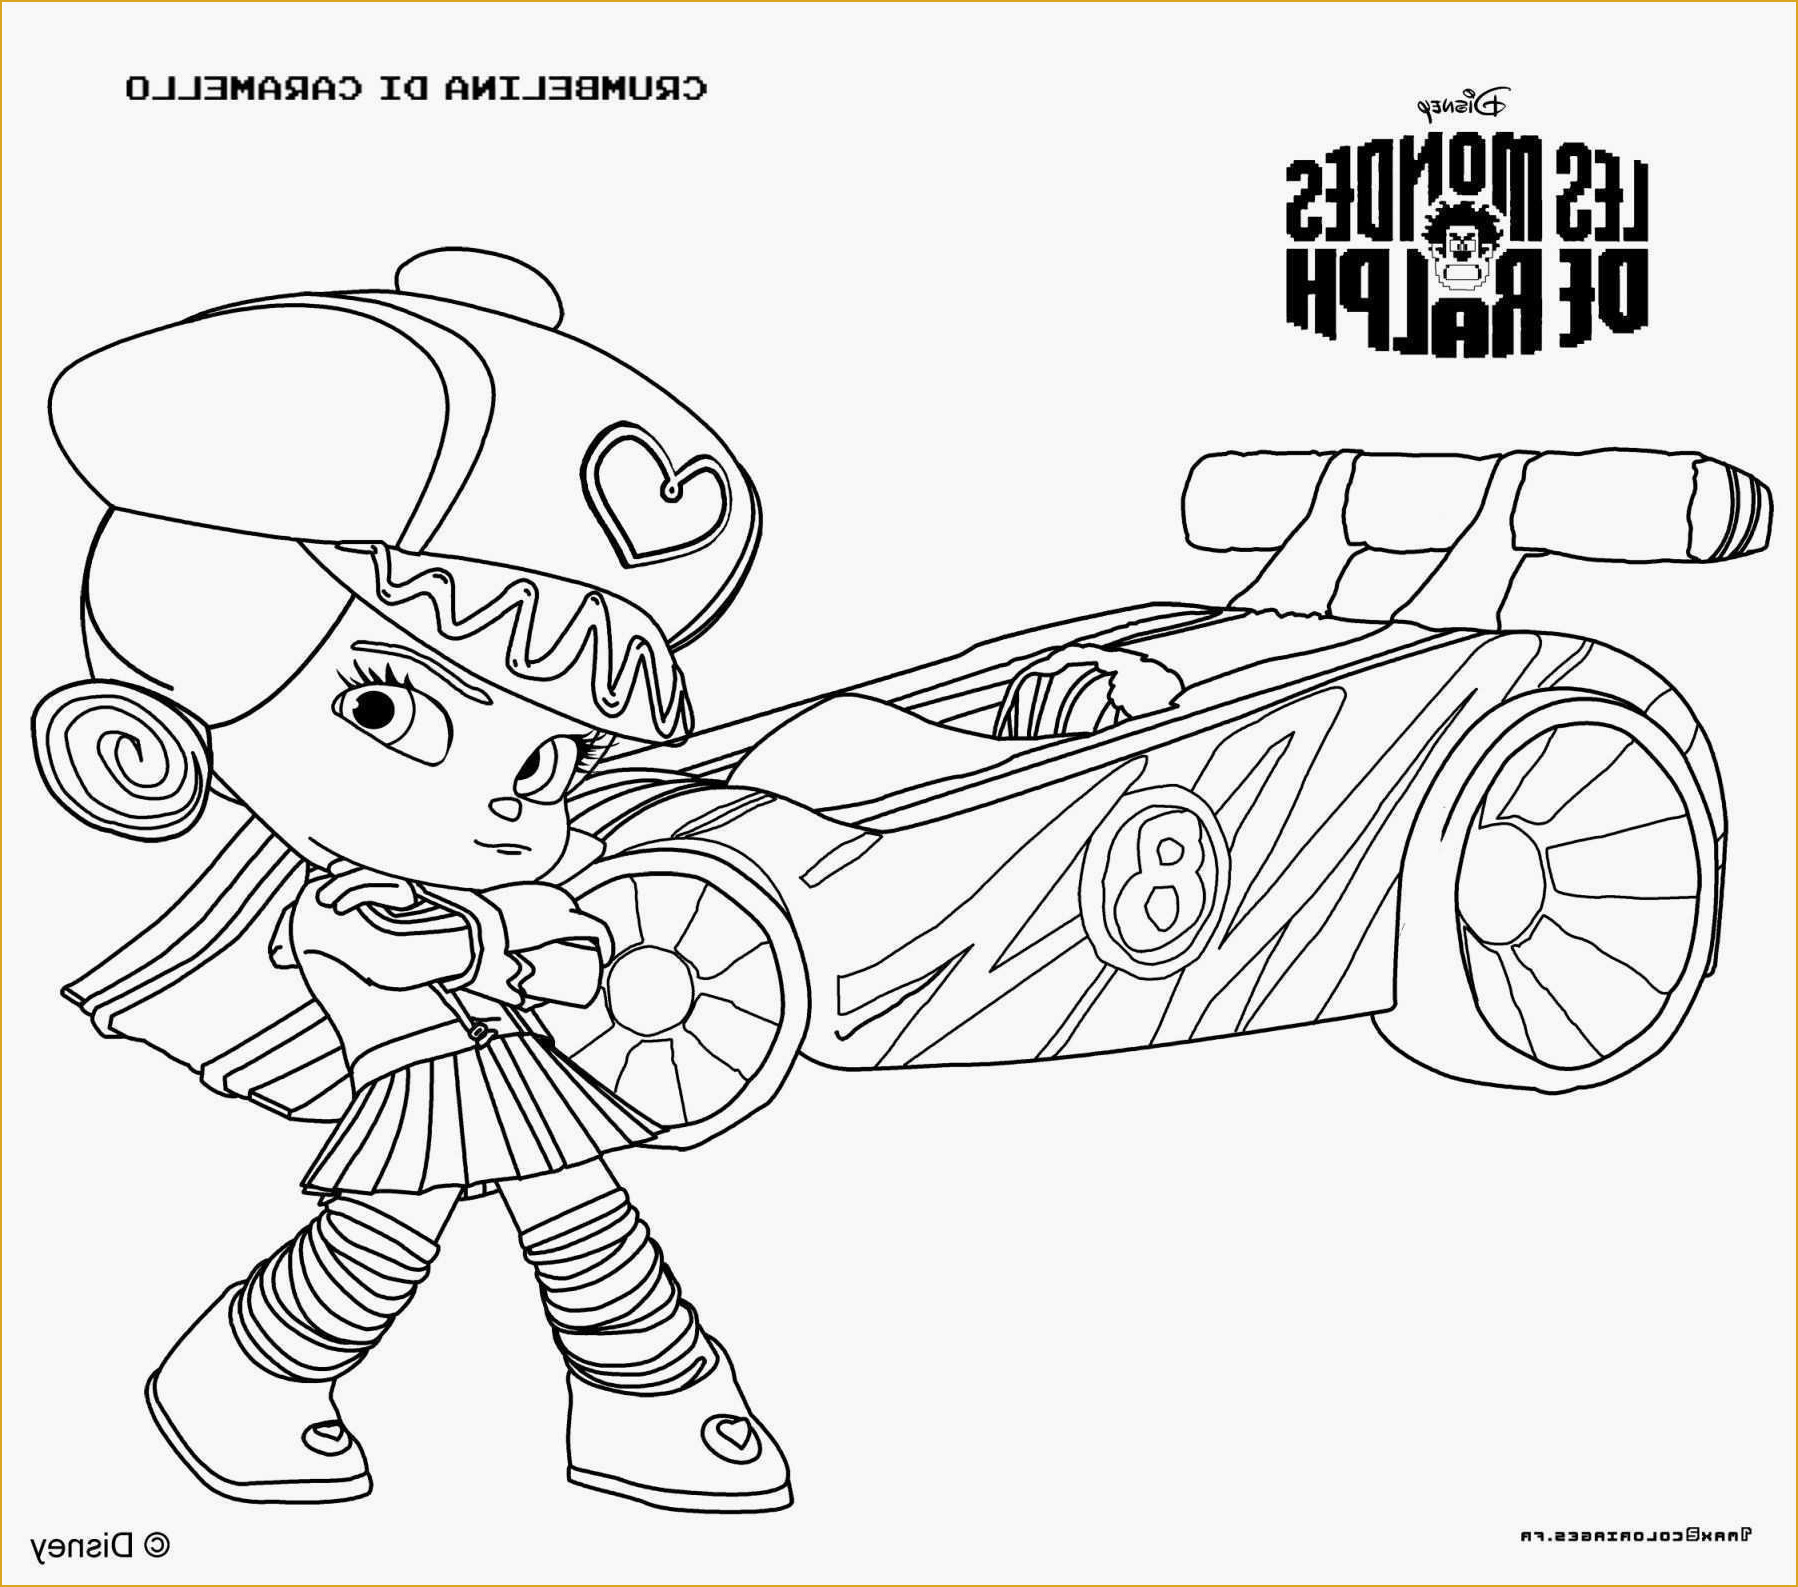 Coloriage Playmobil Chevalier Cool Galerie Coloriage Playmobil Chevalier Fin 43 Lovely Lego Nexo